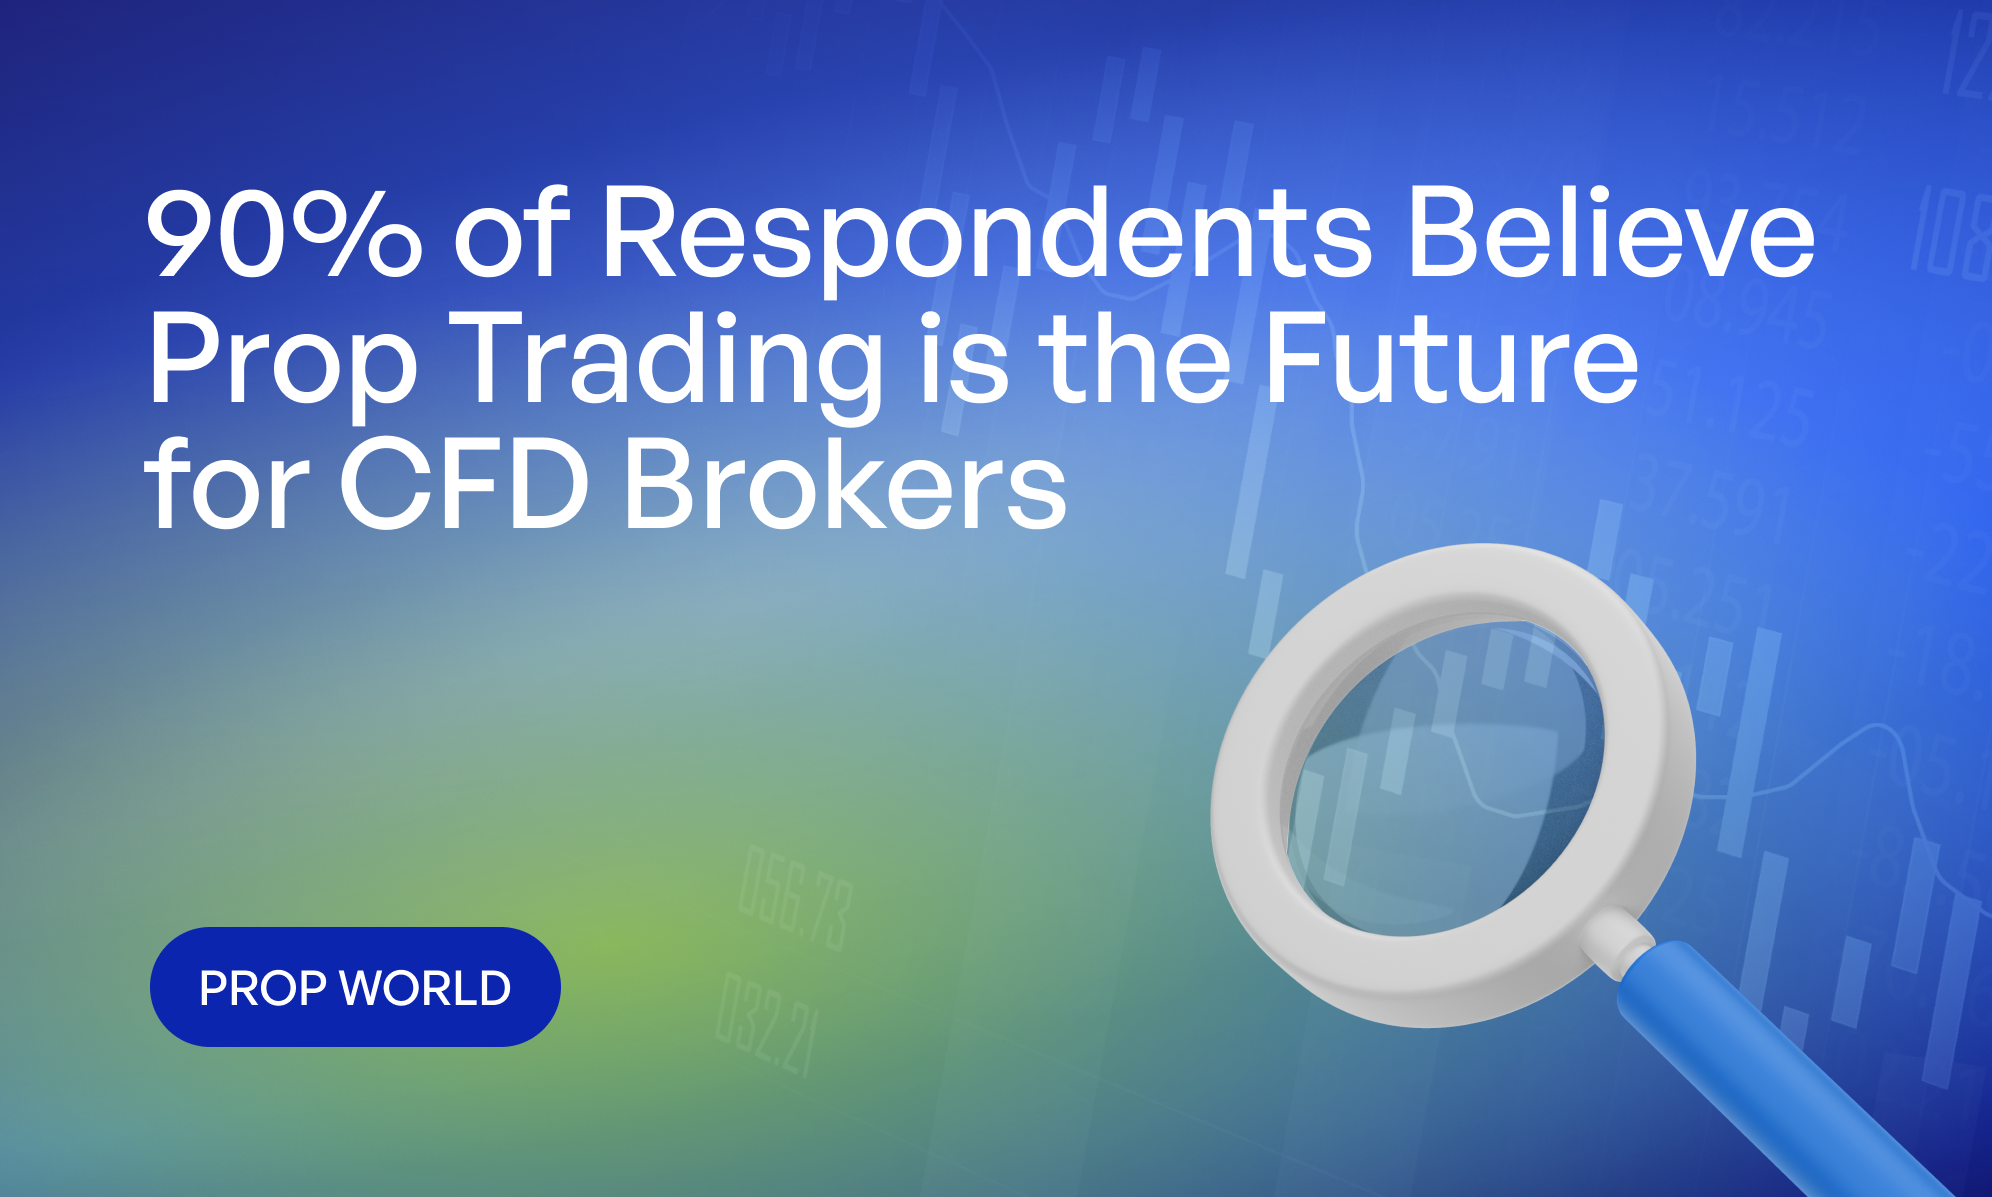 90% of Respondents Believe Prop Trading is the Future for CFD Brokers